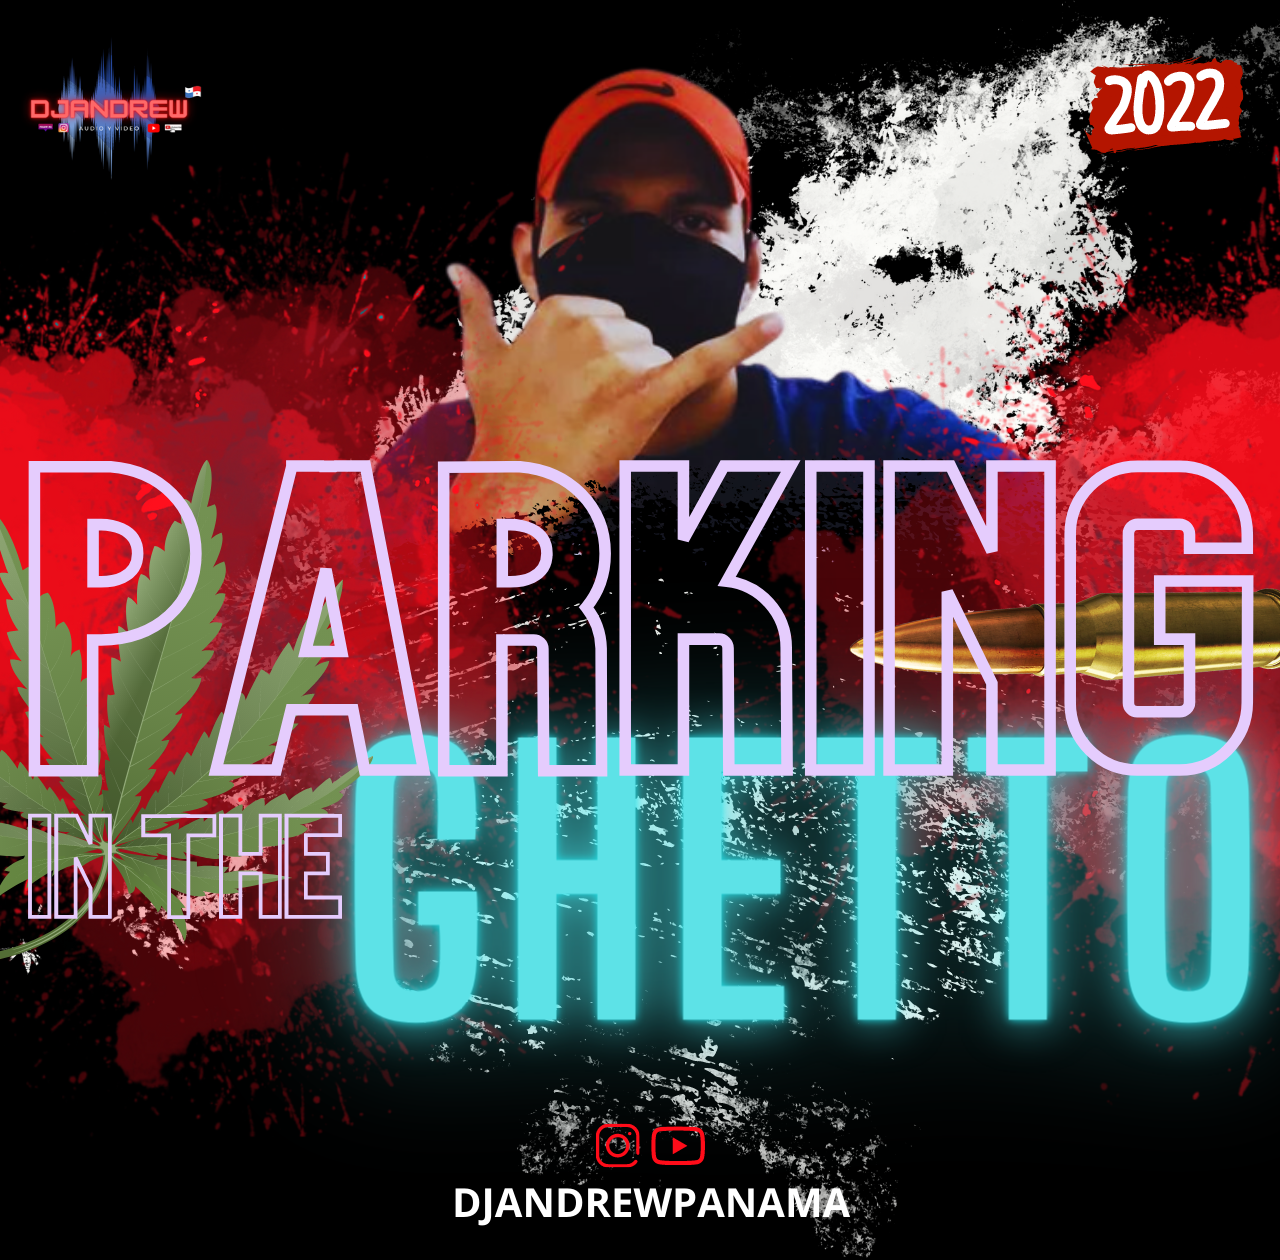 Dj Andrew Panama - Parking In The Ghetto (2022)